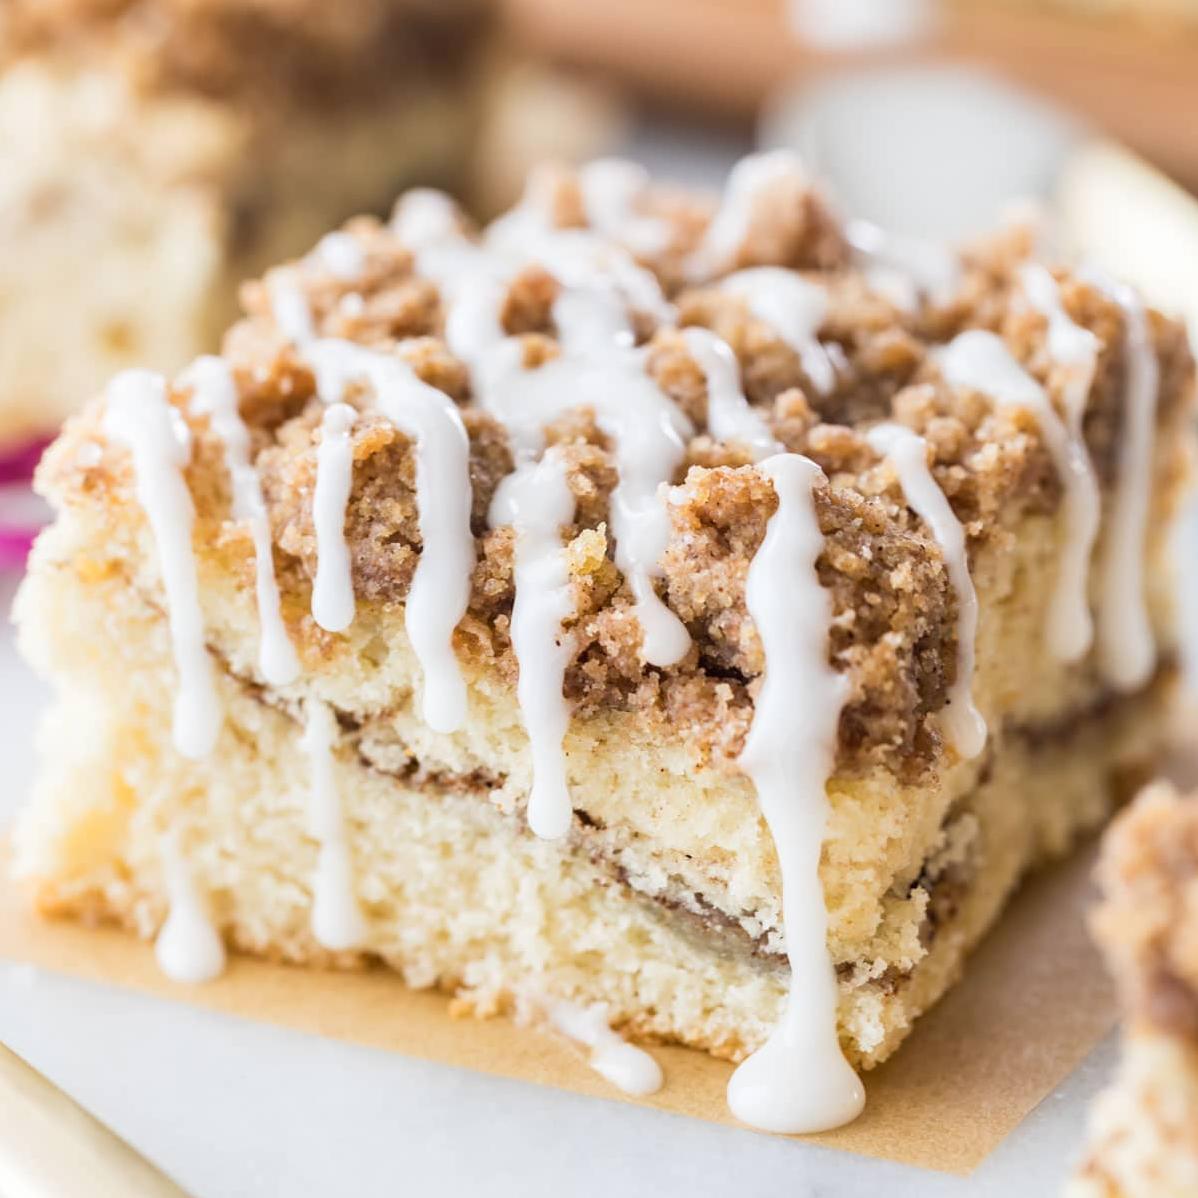  You don't want to miss trying this delicious coffee cake!